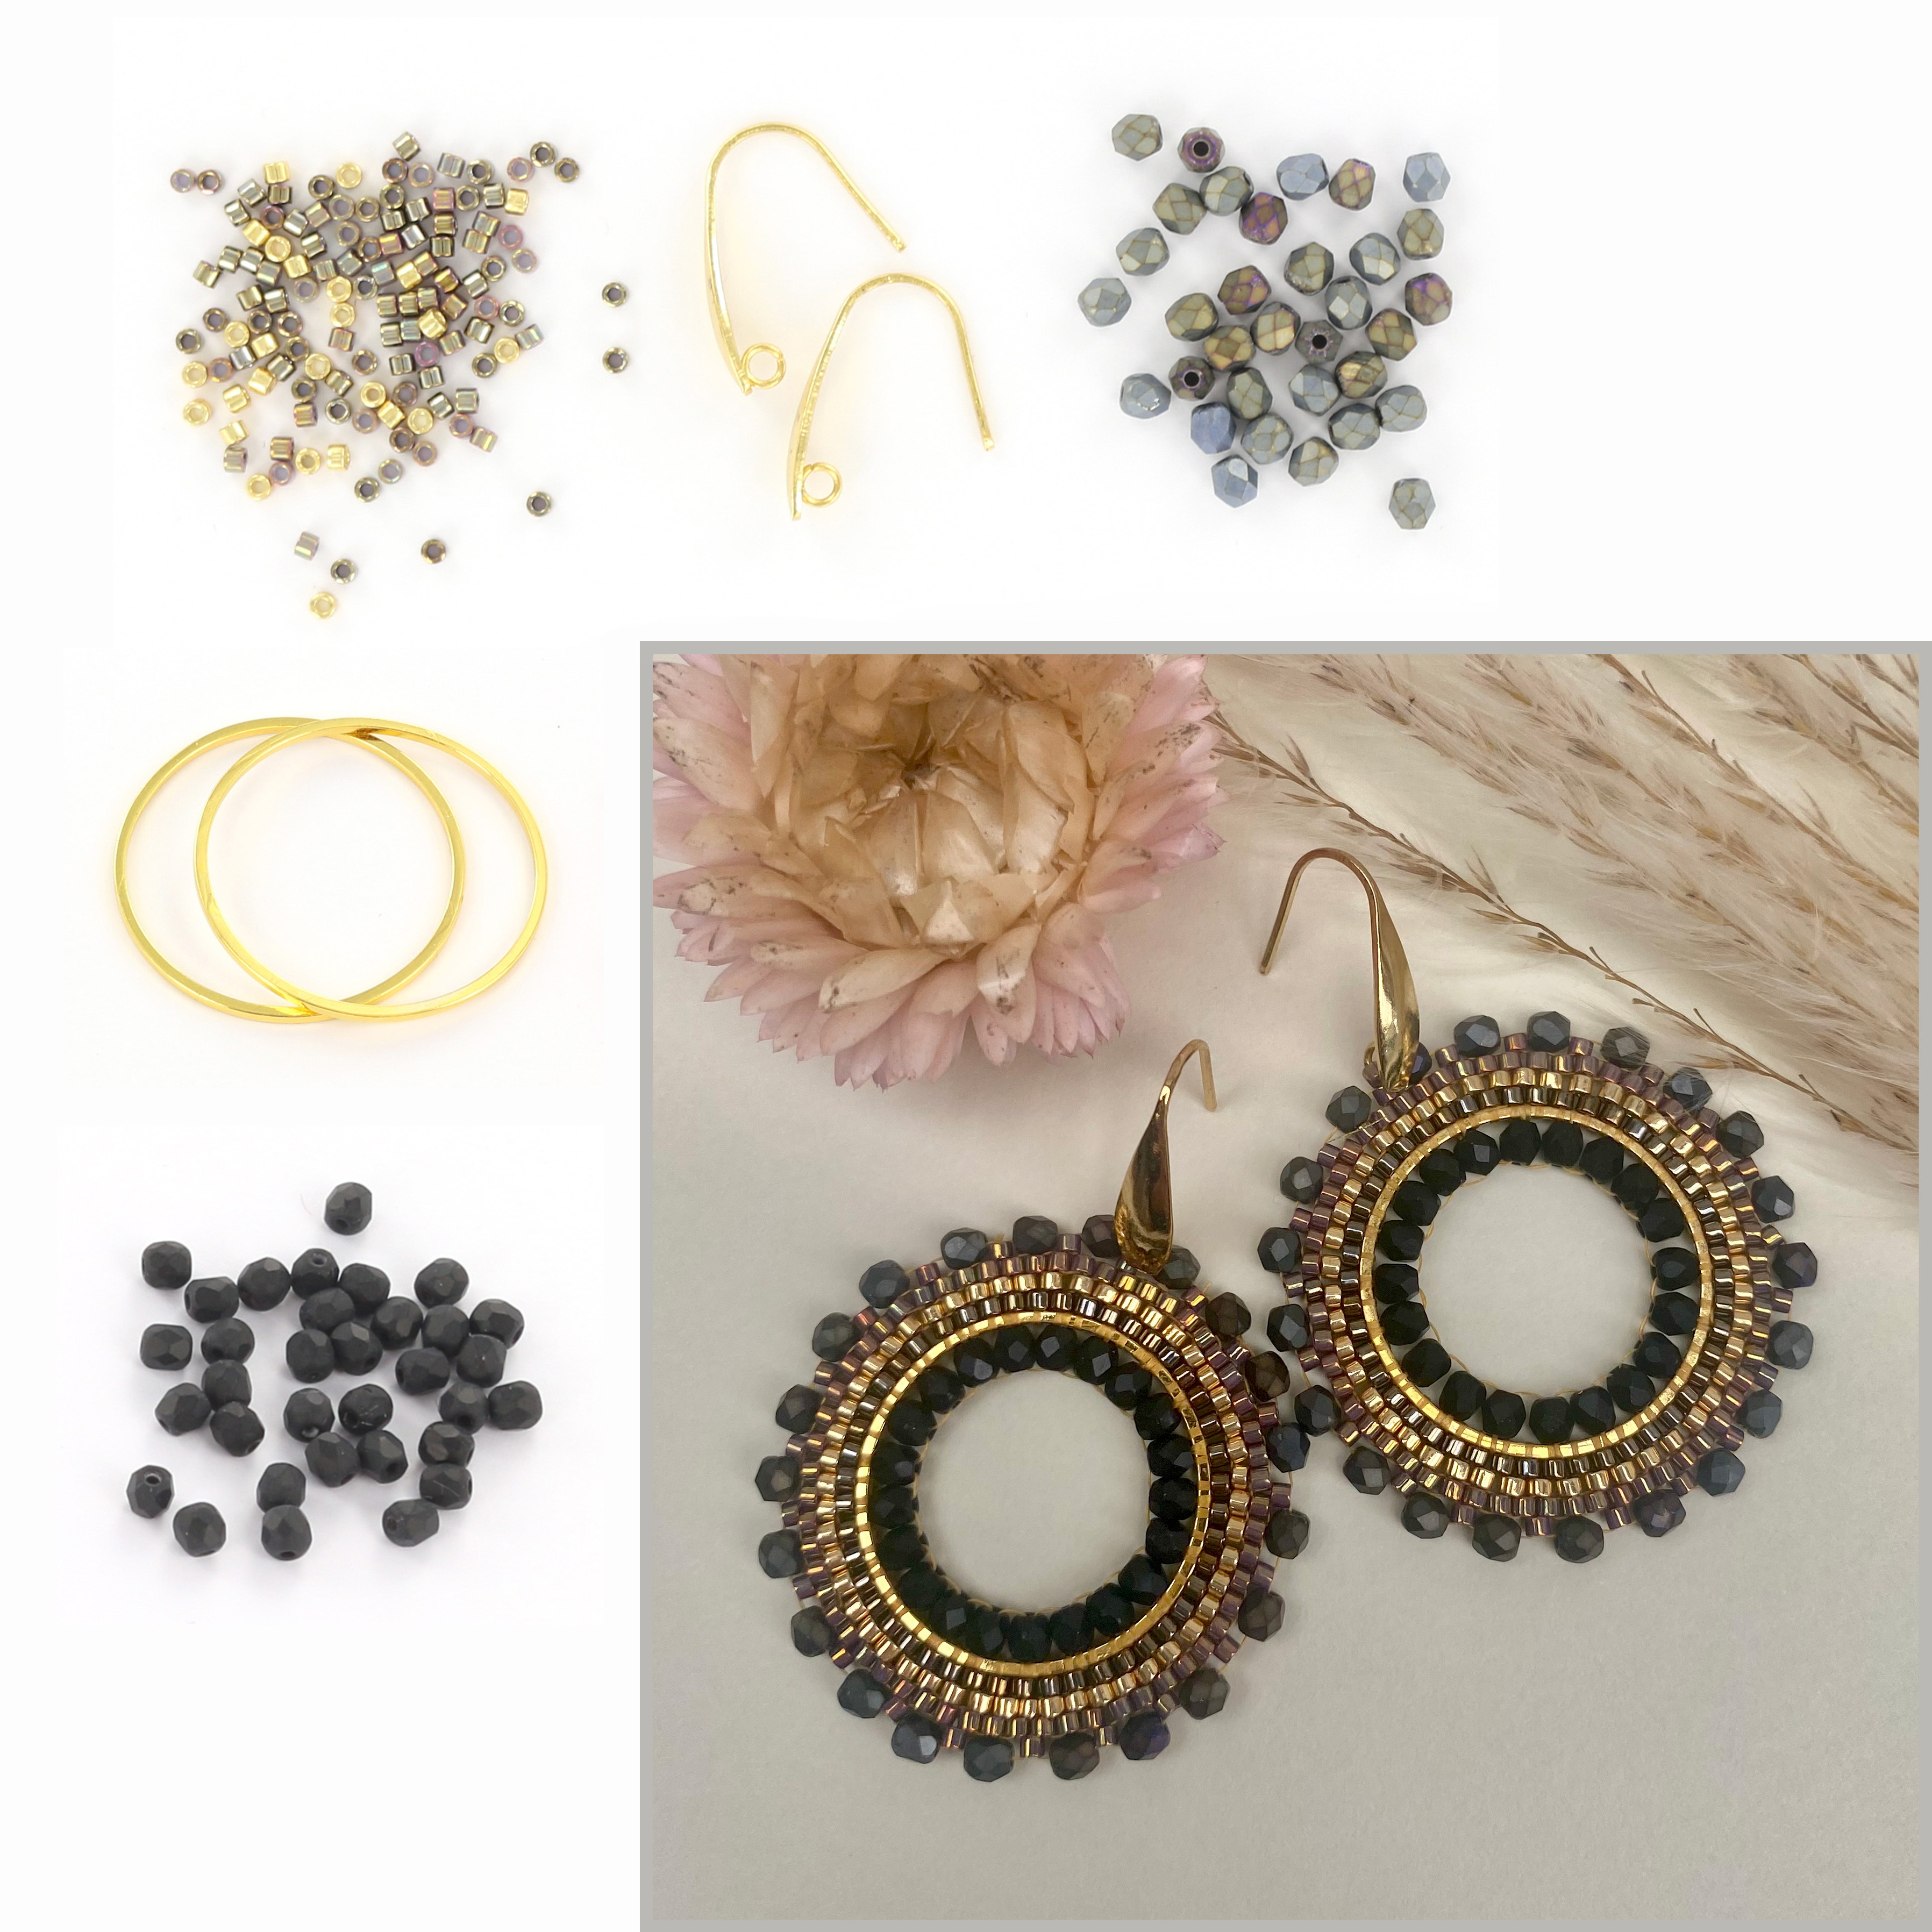 Extra pictures DIY kit round earrings - bronze and gold